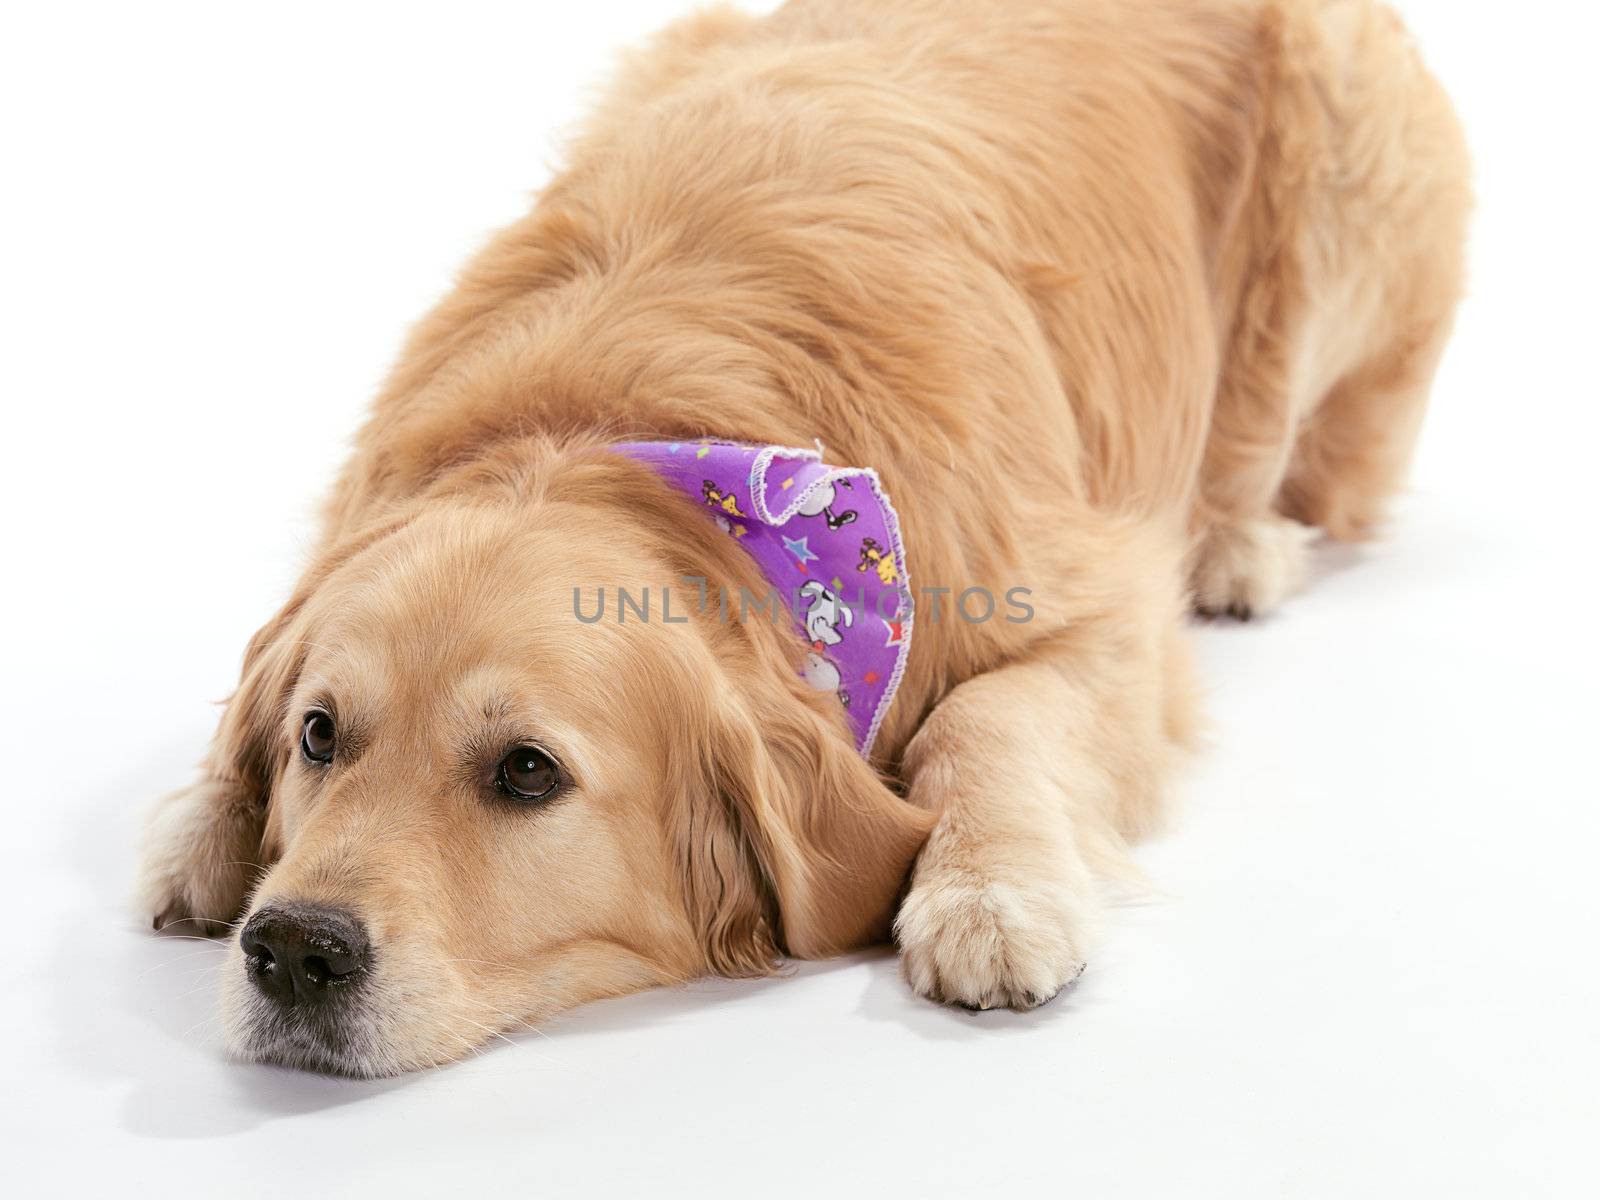 A tired Golden Retriever on a white background